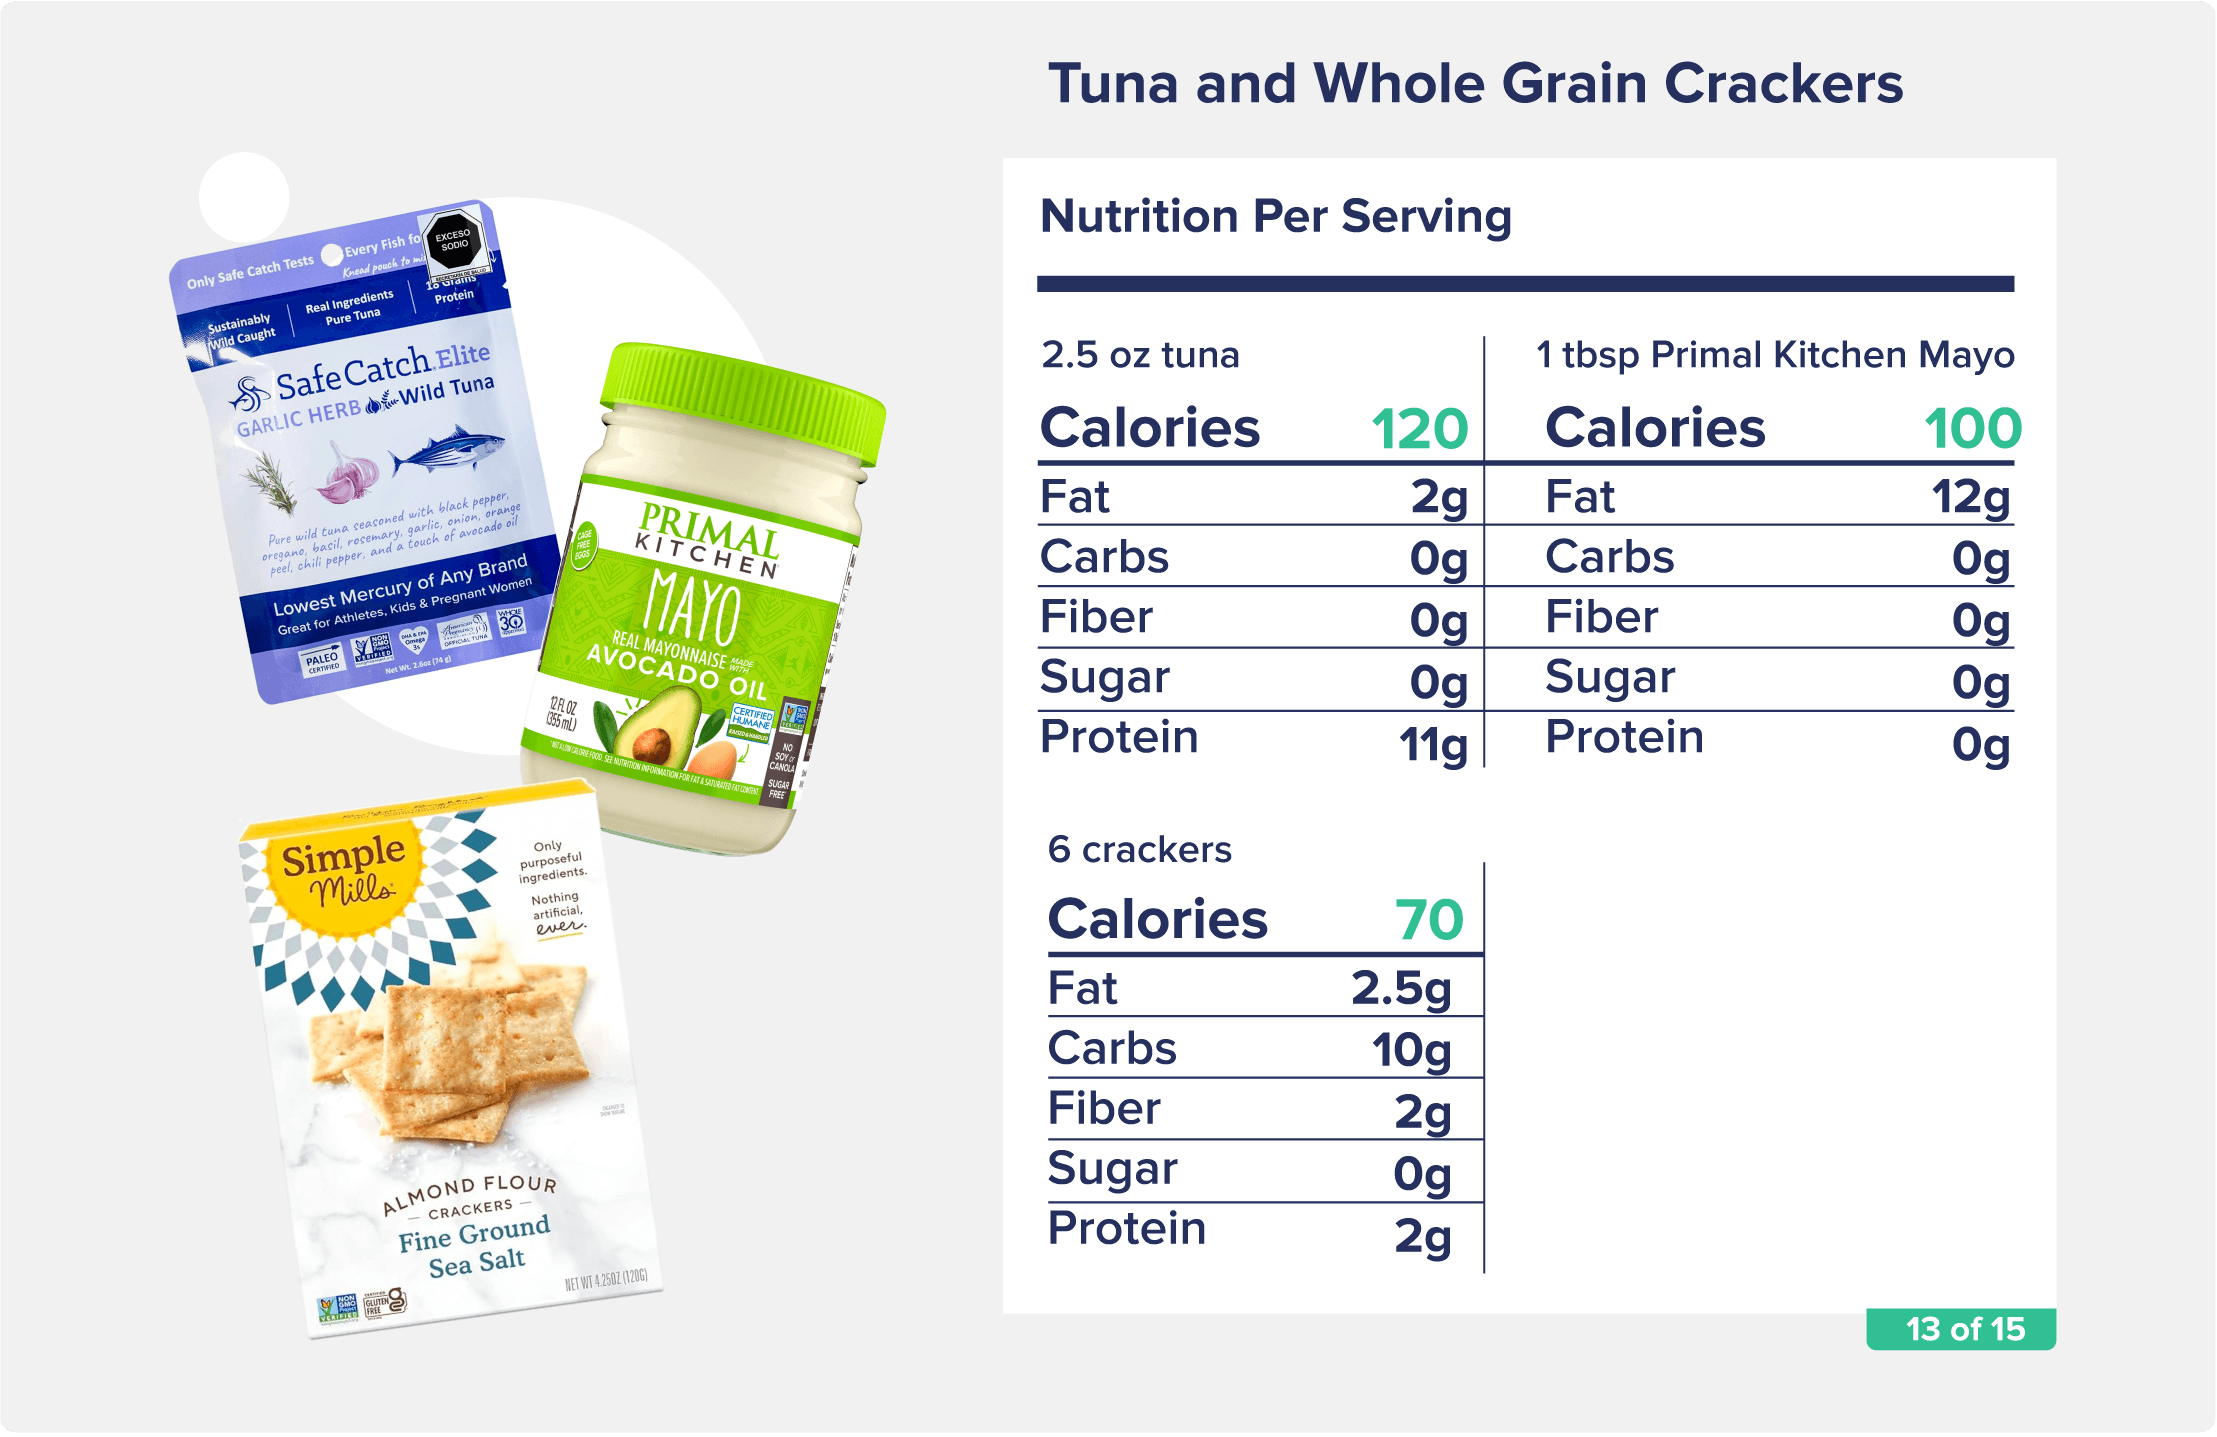 A package of Safe Catch Tuna, a tub of Primal Kitchen Mayo, and a box of Simple Mills Almond Flour crackers pictured with accompanying nutrition facts like calories, fat, and protein.